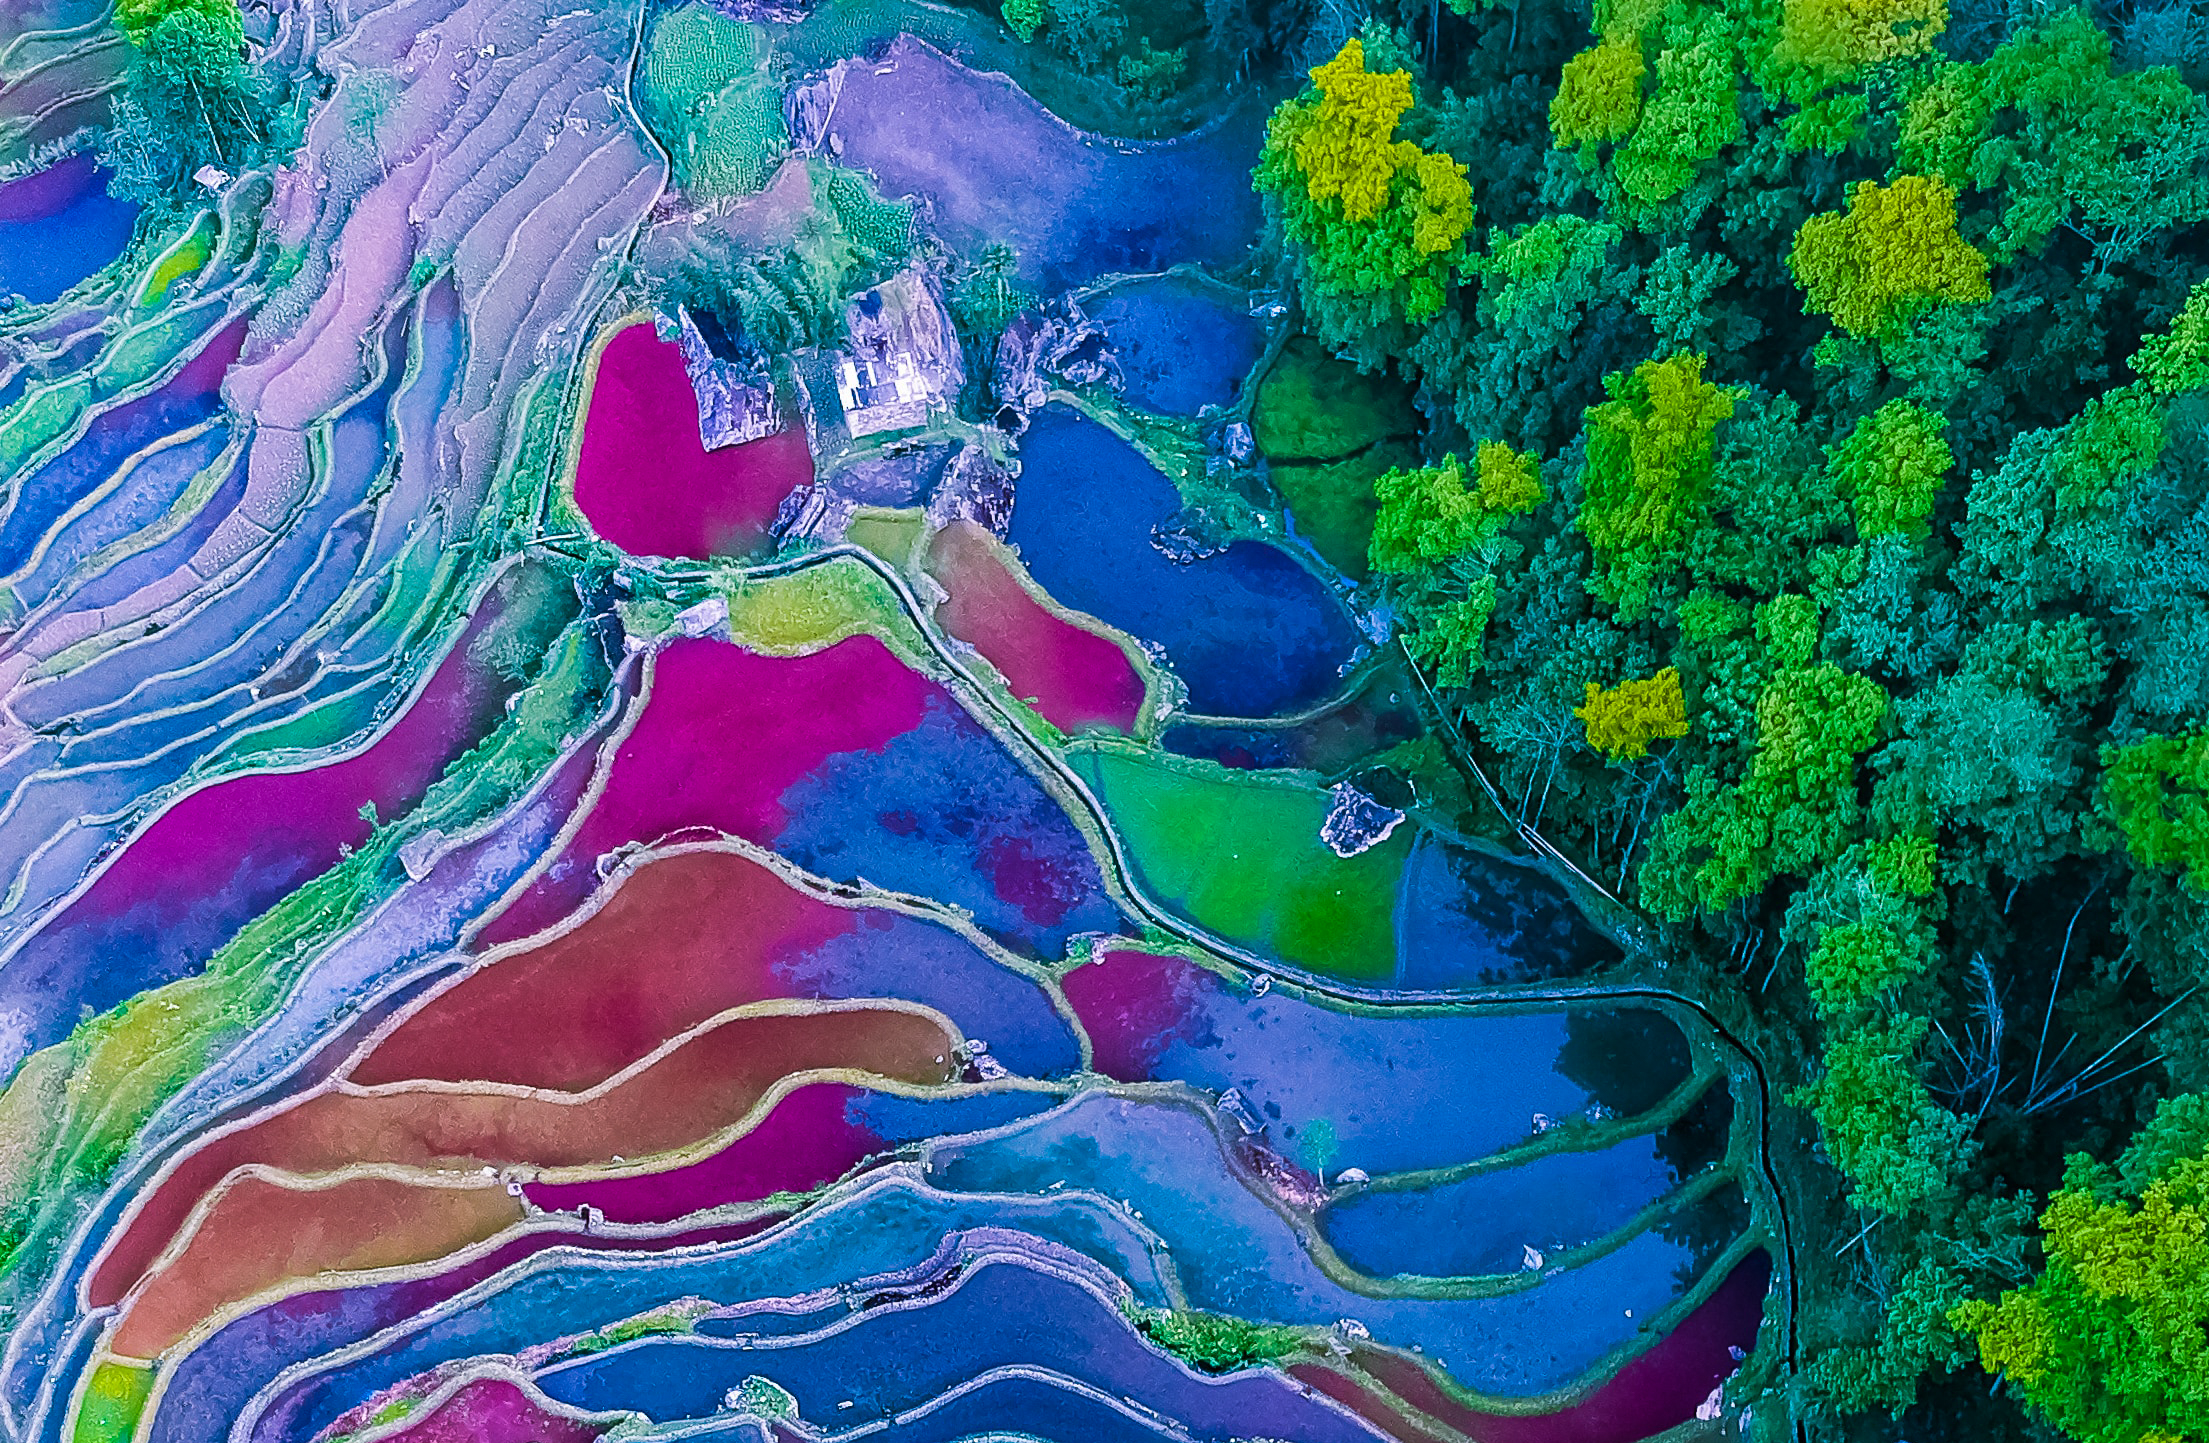 An aerial photograph of an irrigated agricultural wetland with a series of thin ponds stacked like pancakes from the top to the bottom of the photo. The ponds are colored richly, possibly with algal blooms in green, blues, purples and pinks. A forest lines the right side of the landscape. This photo was taken and colorized by Tiraya Adam.